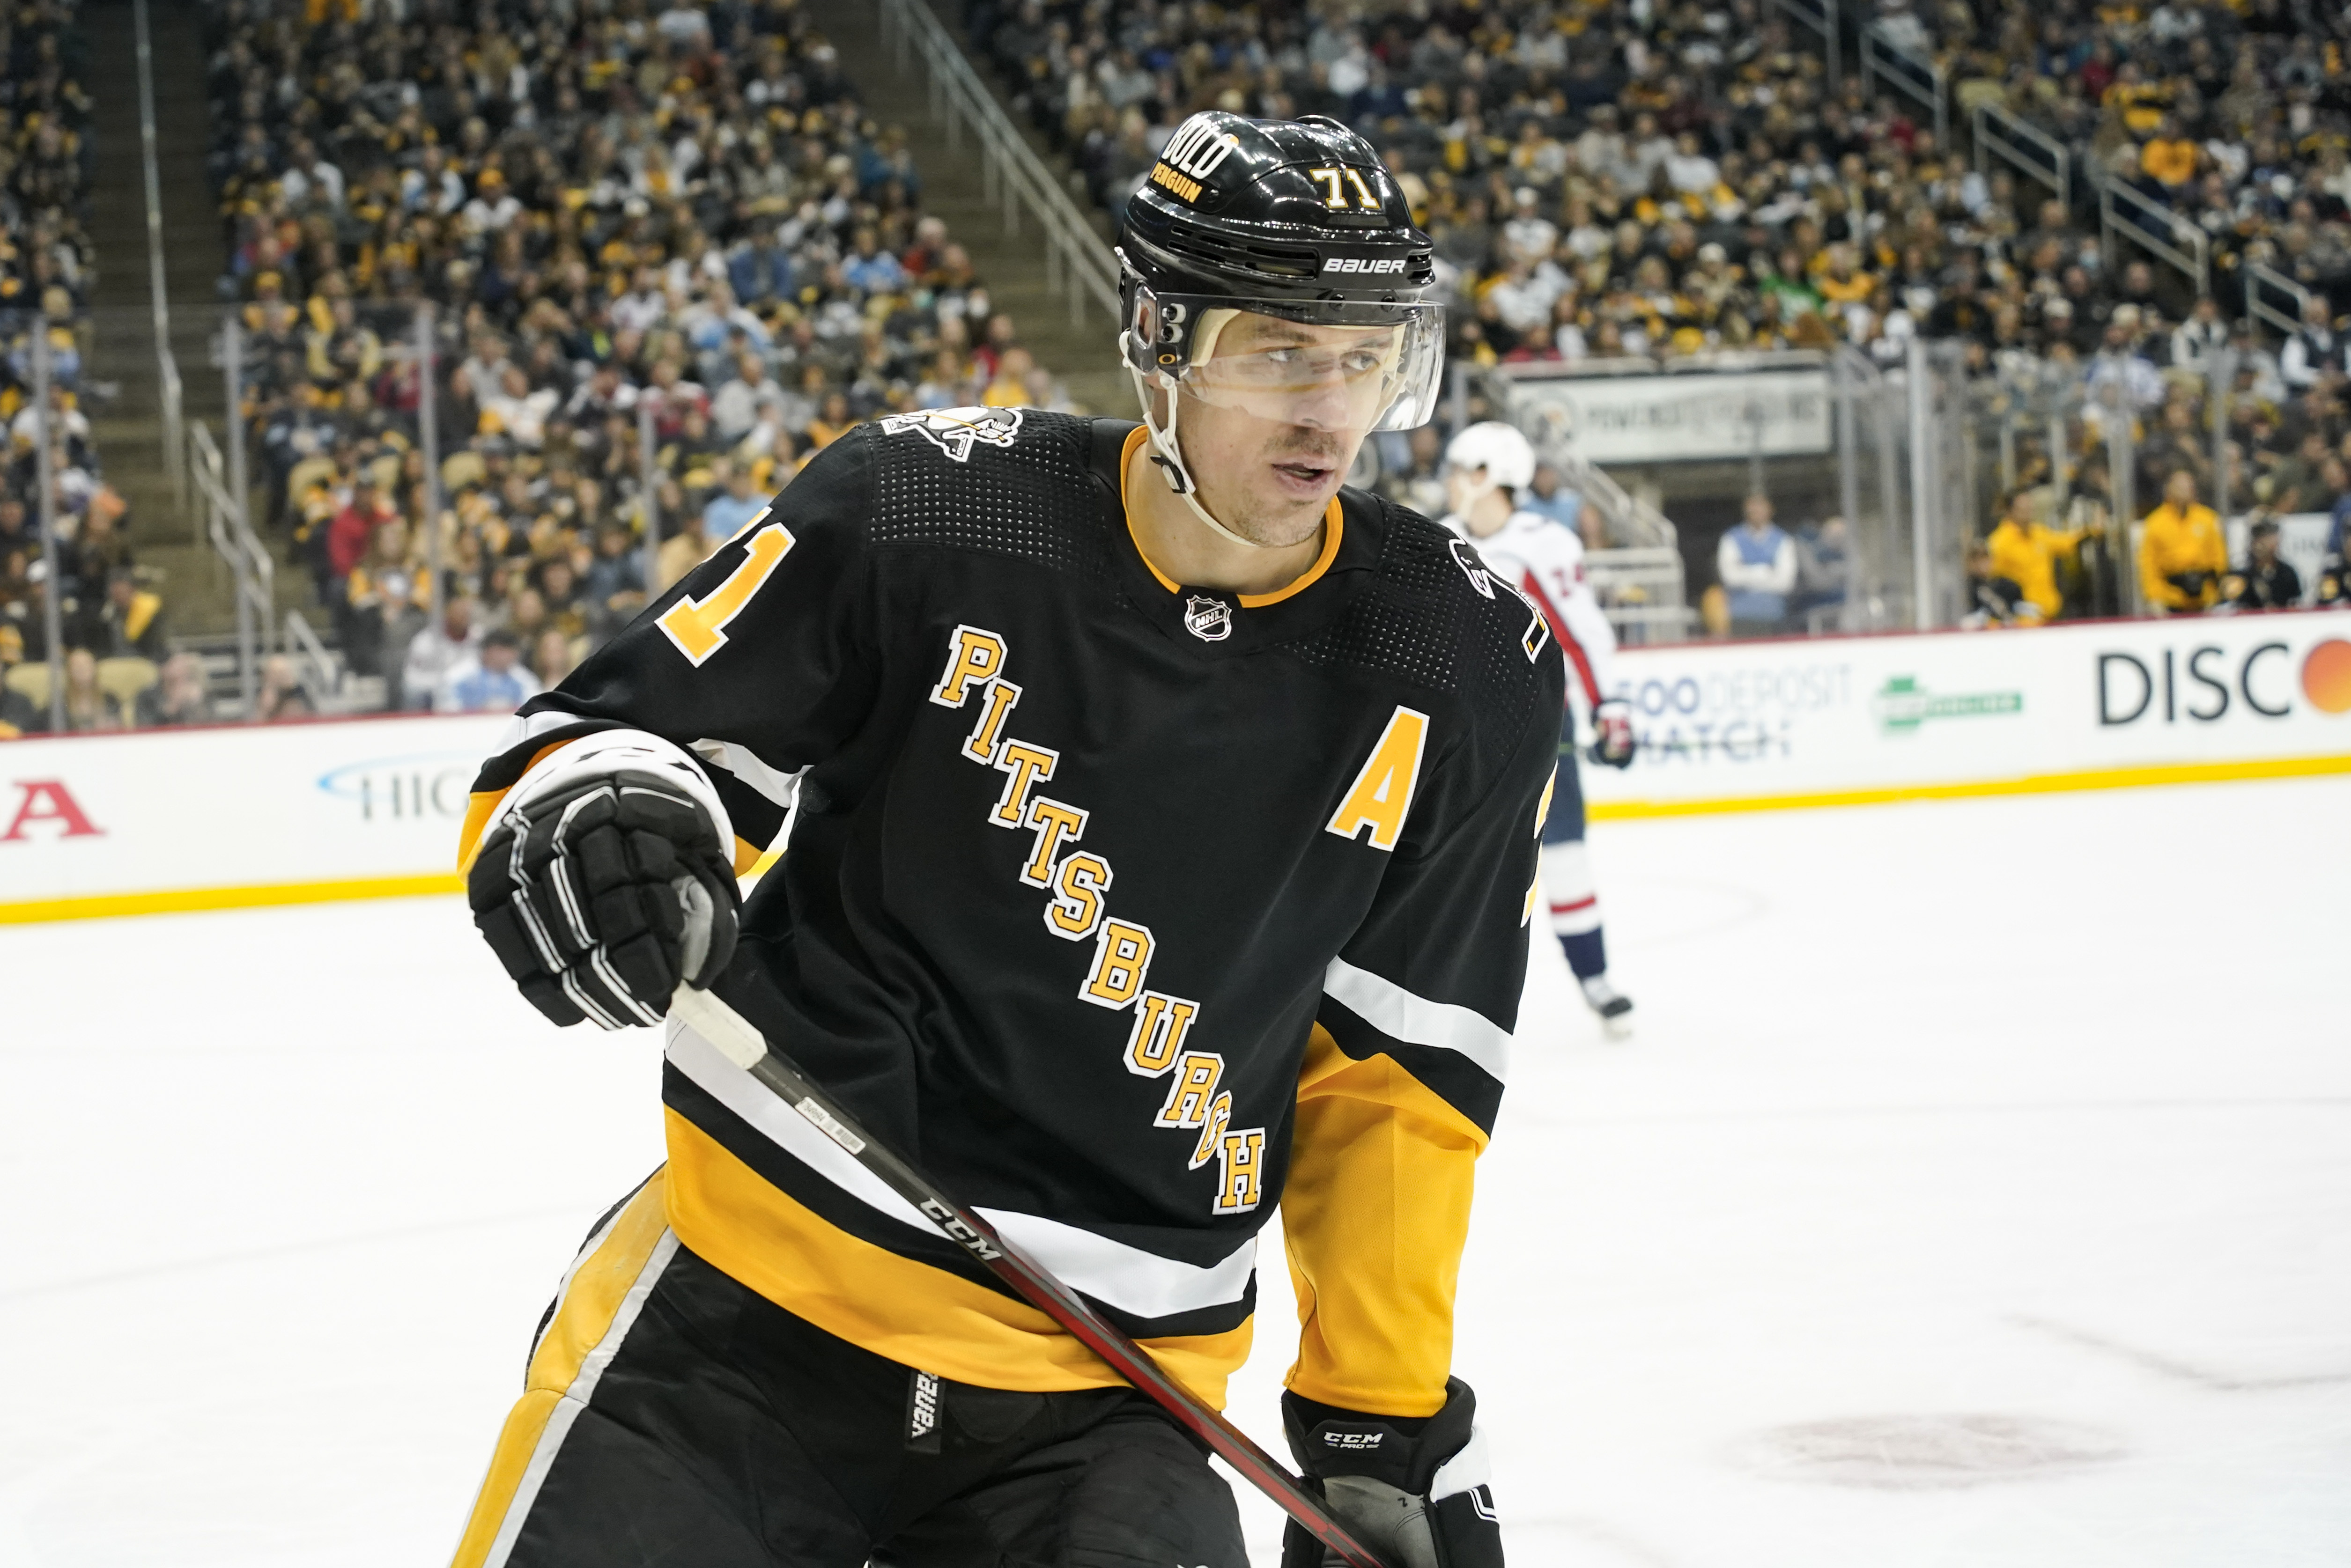 Evgeni Malkin agrees to 4-year extension with Penguins